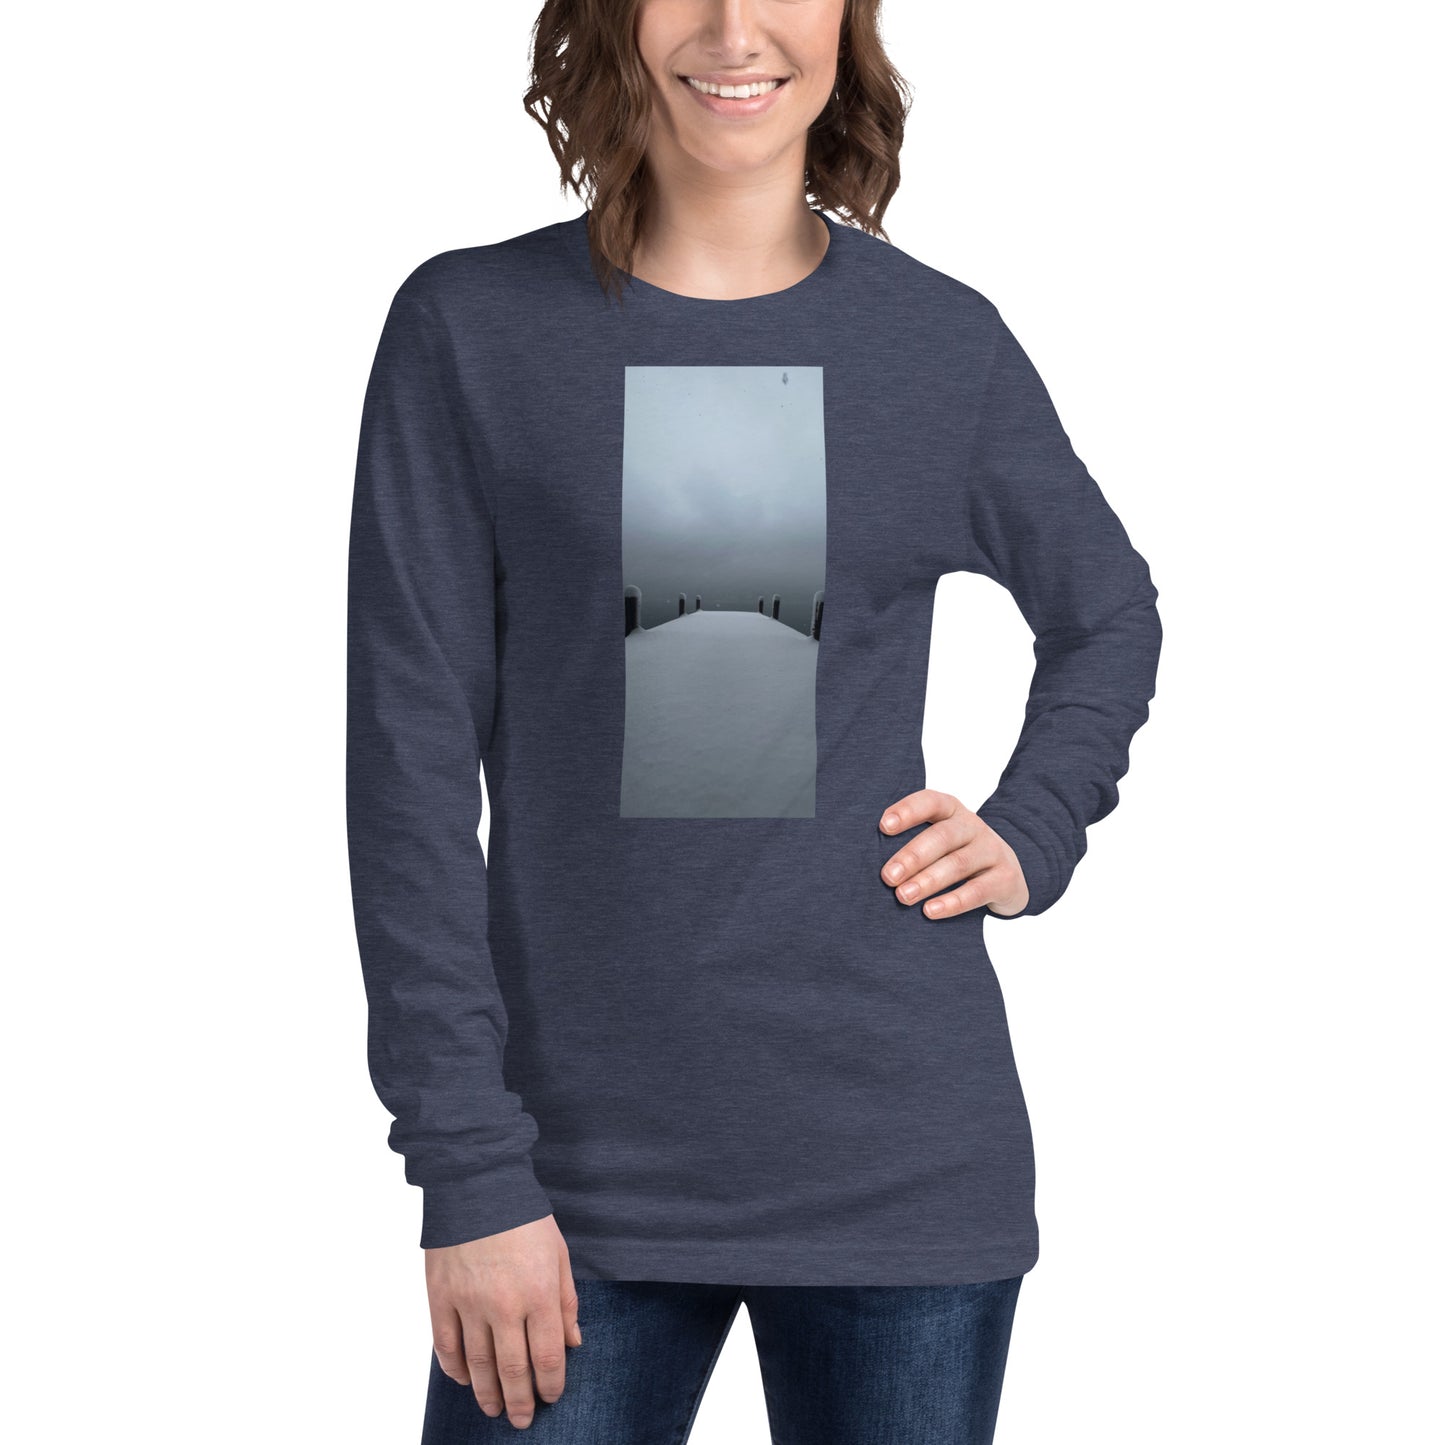 I doubt the Donner party wore clothes this rad (unisex long sleeve)